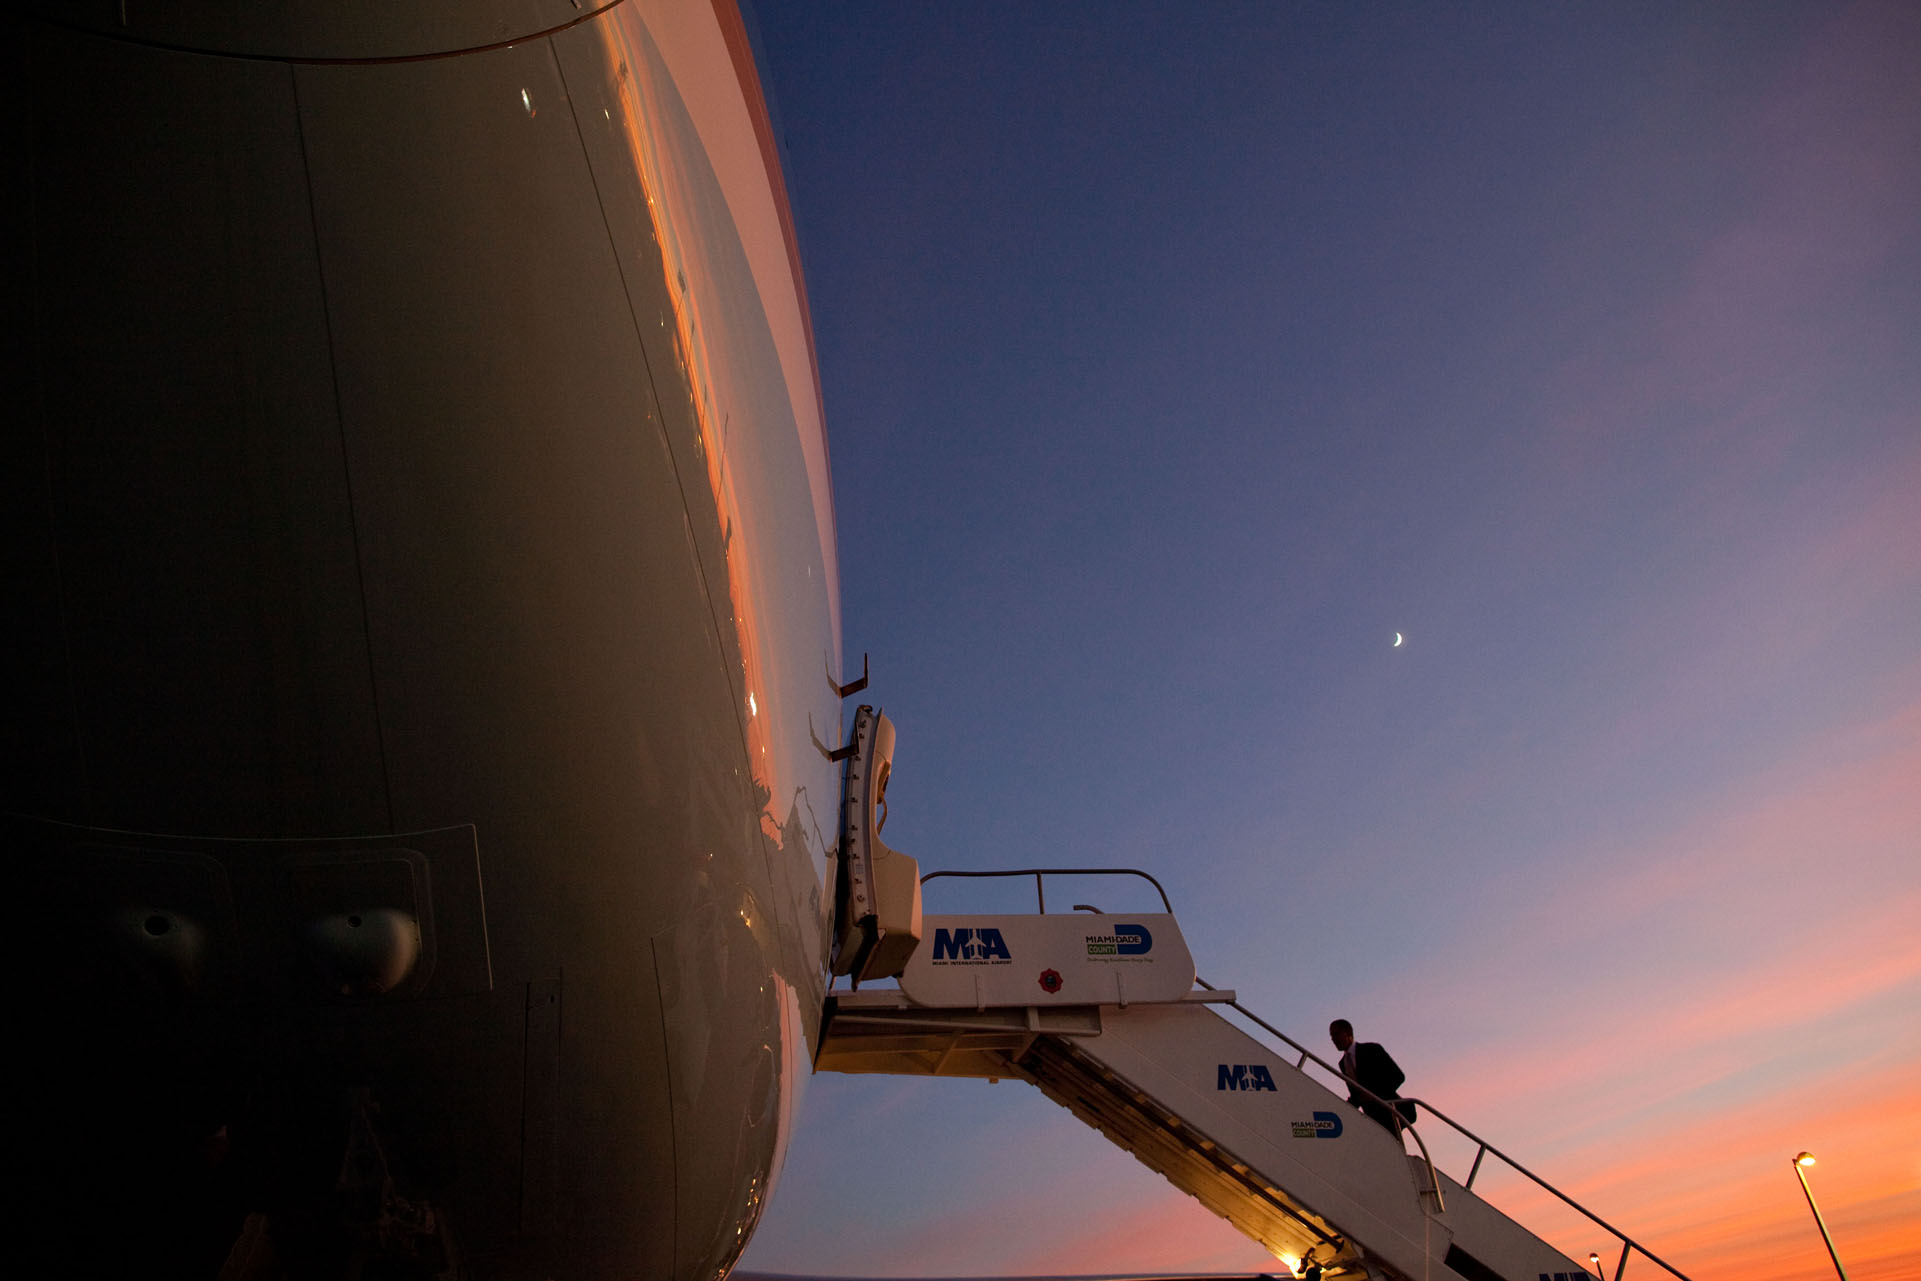 The President Boards Air Force One with a Sunset Backdrop